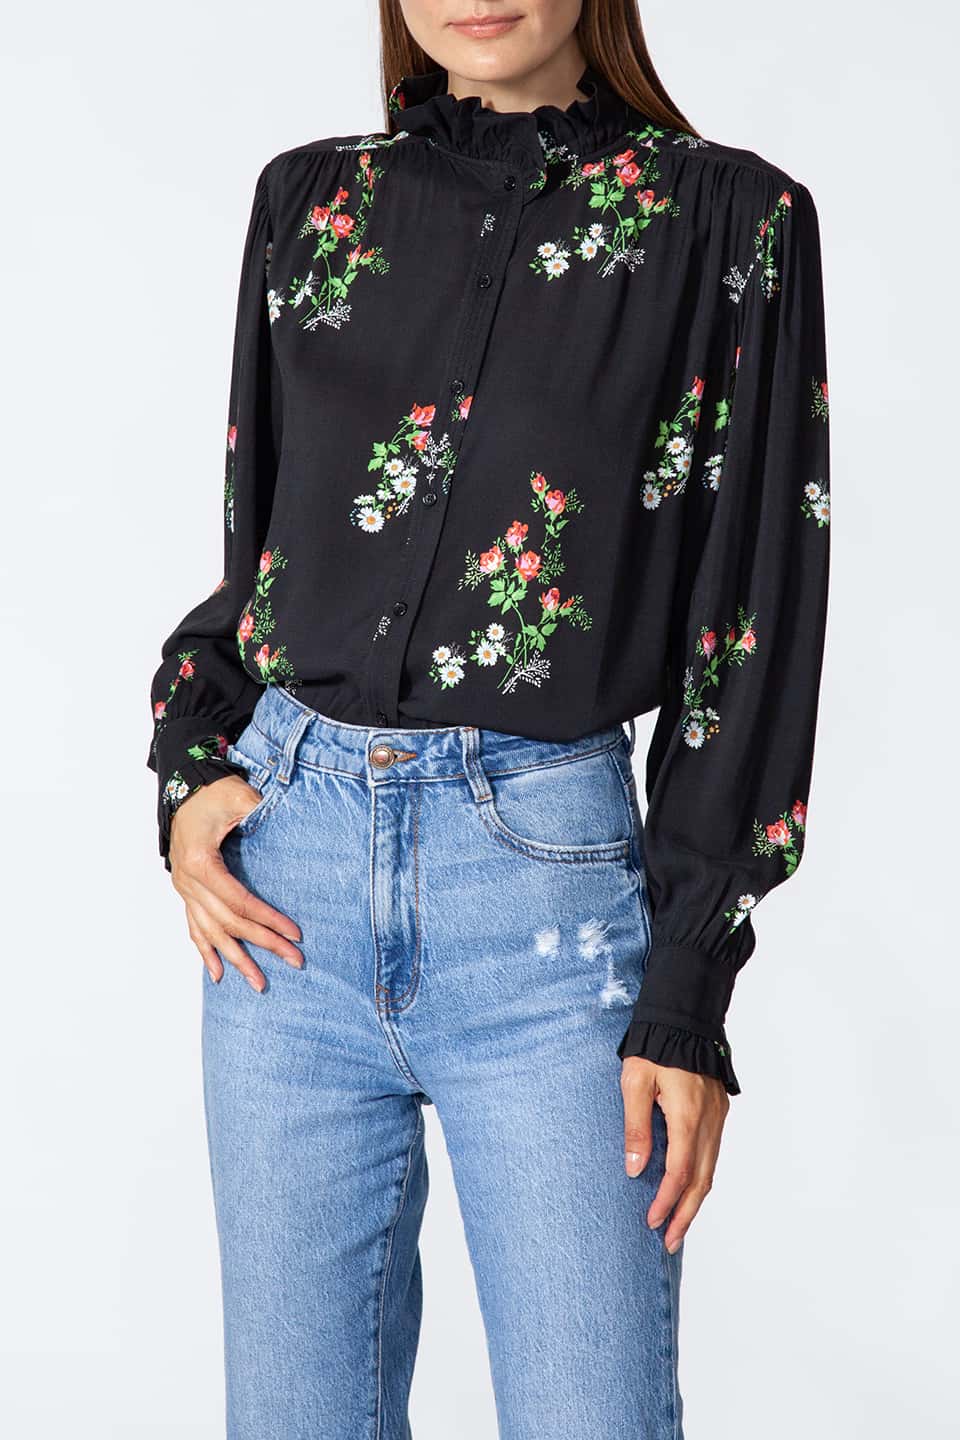 Thumbnail for Product gallery 2, Model wearing trendy blouse from stylist Manoush in black color and flower print, in a natural pose